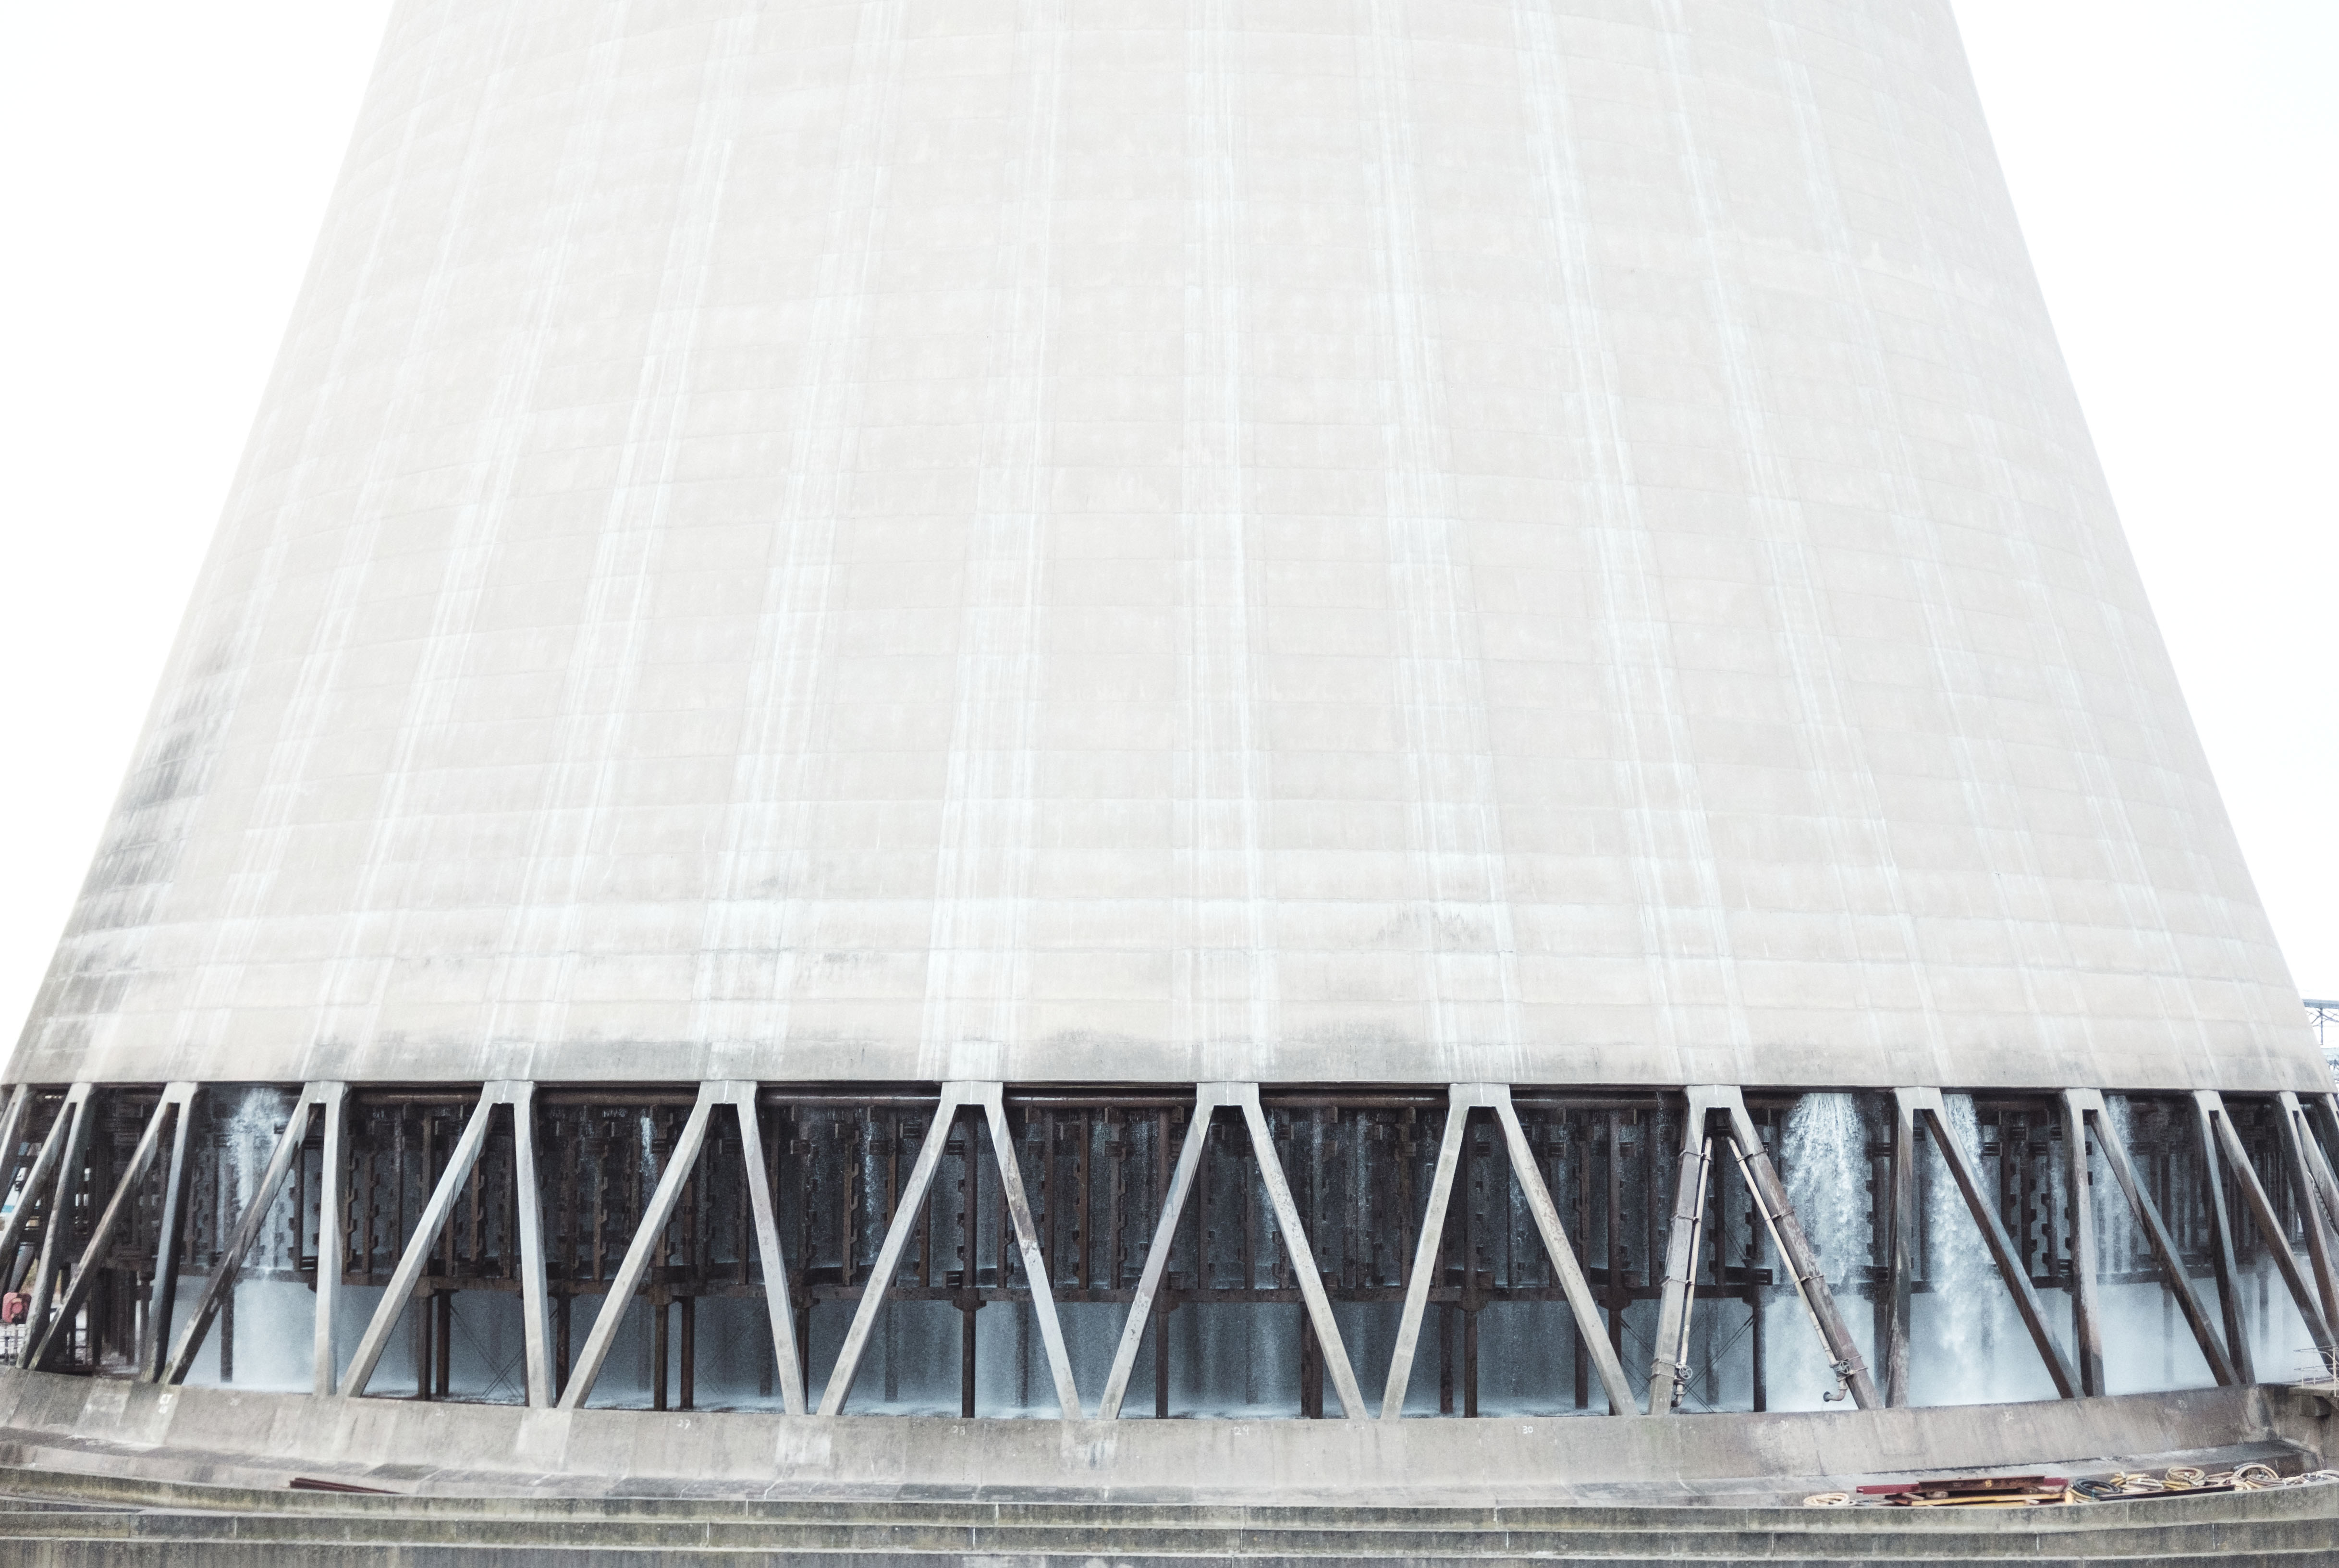 Close up image of Drax cooling tower